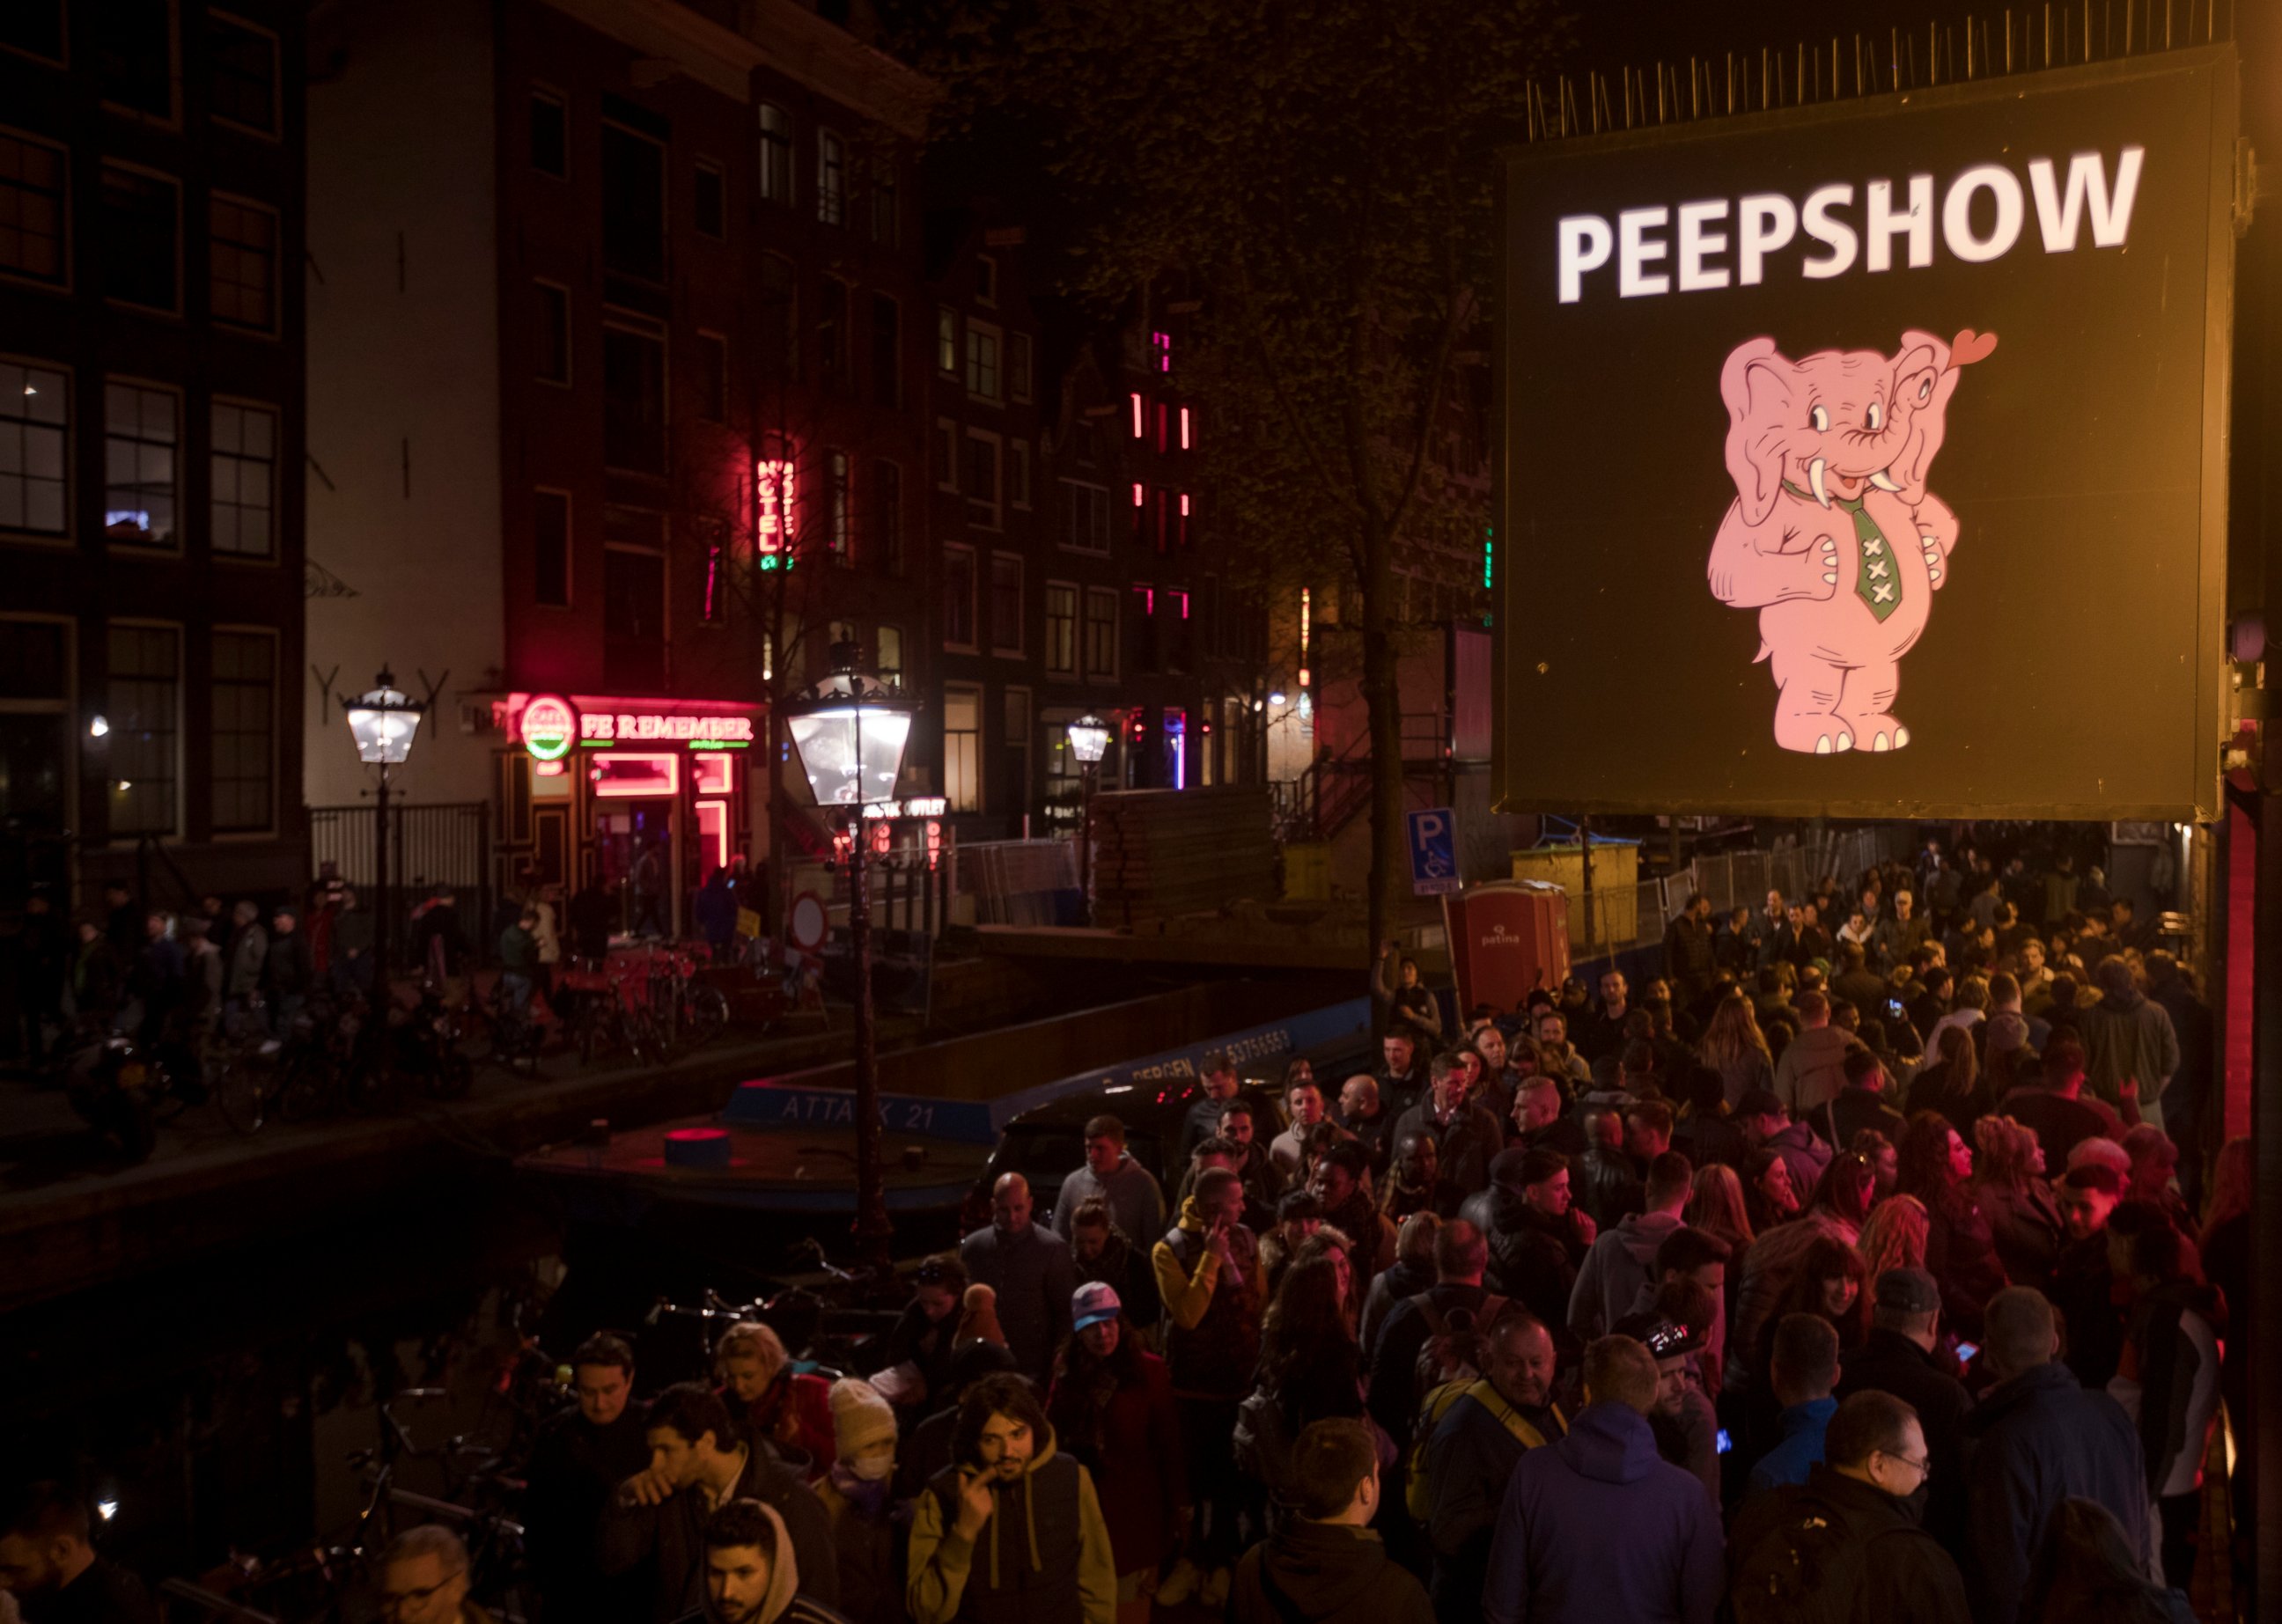 PHOTO: Tourists are bathed in a red glow emanating from the windows and peep shows' neon lights are packed shoulder to shoulder as they shuffled through the alleys in Amsterdam's red light district, Netherlands, Friday evening, March 29, 2019.